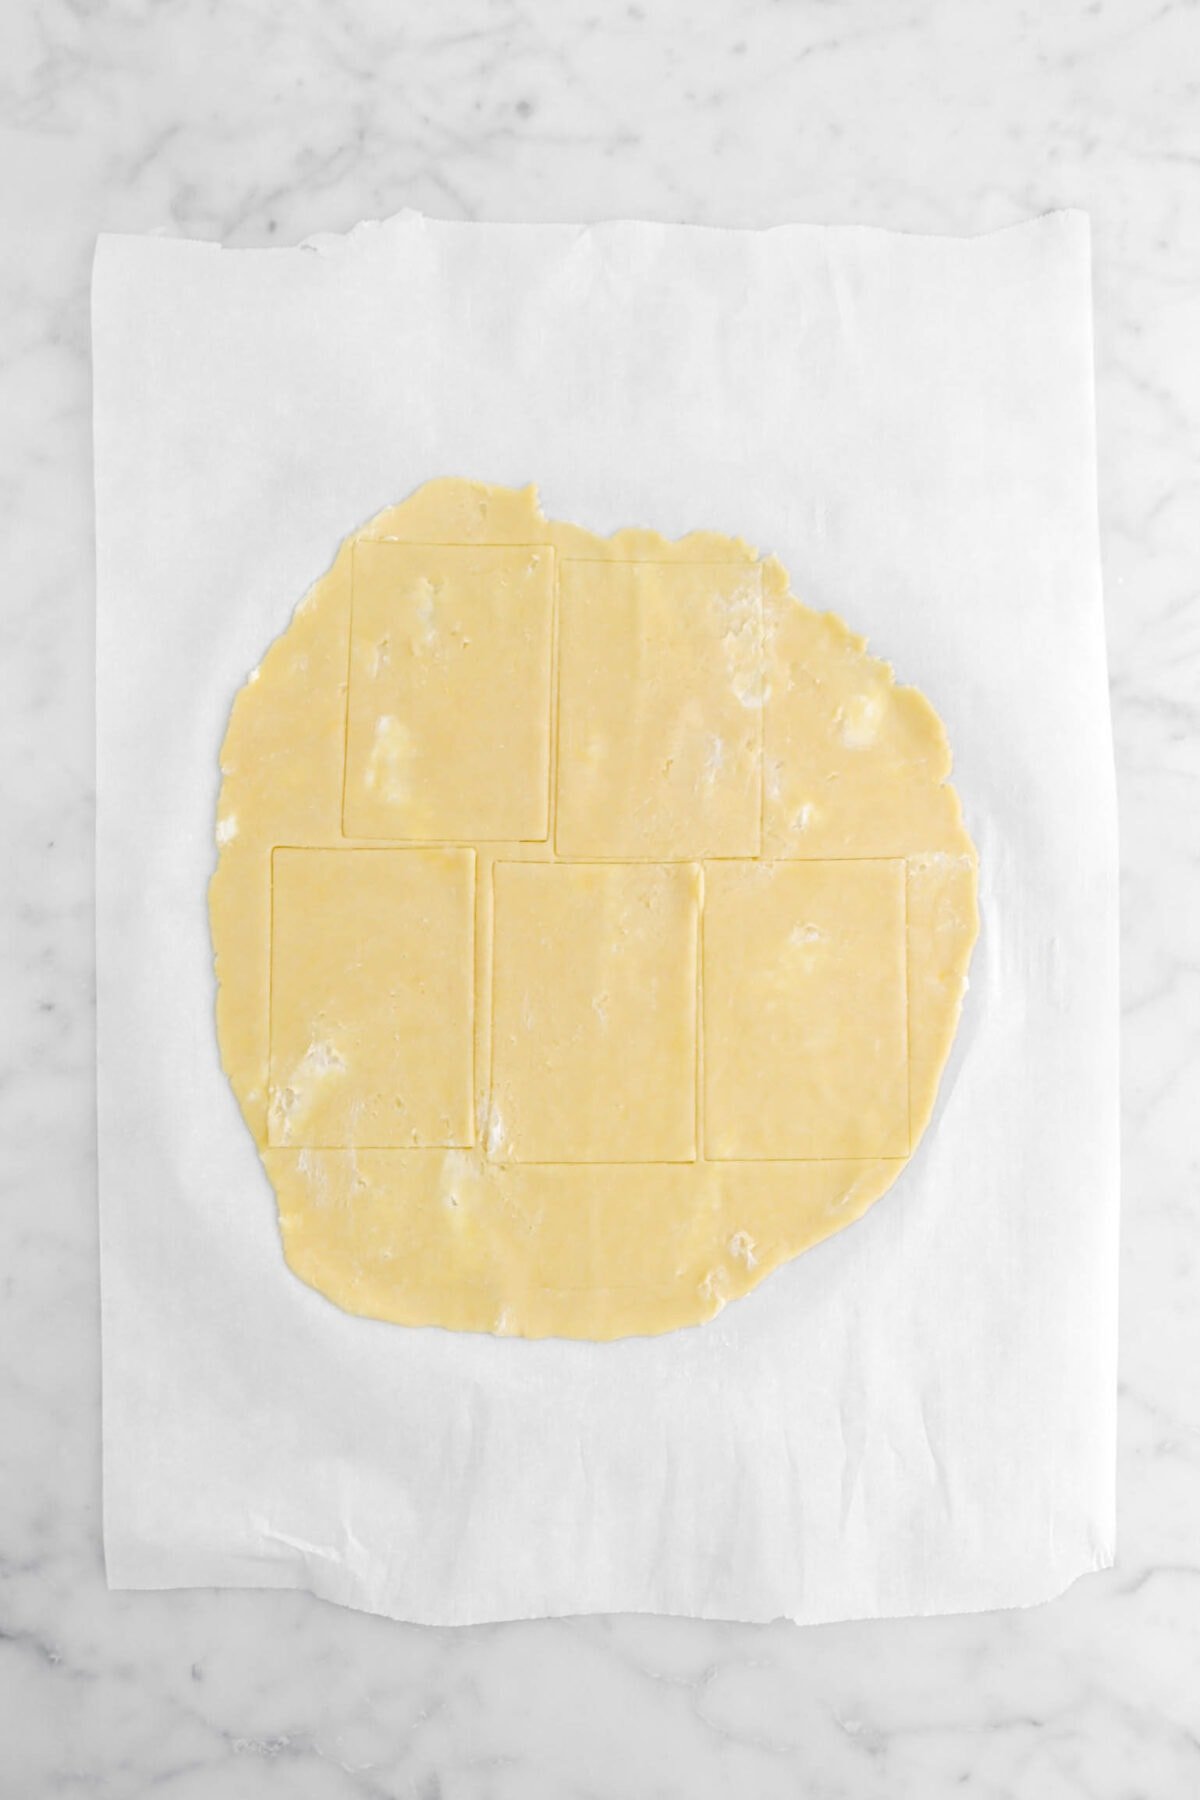 five rectangles cut into rolled out pie dough.